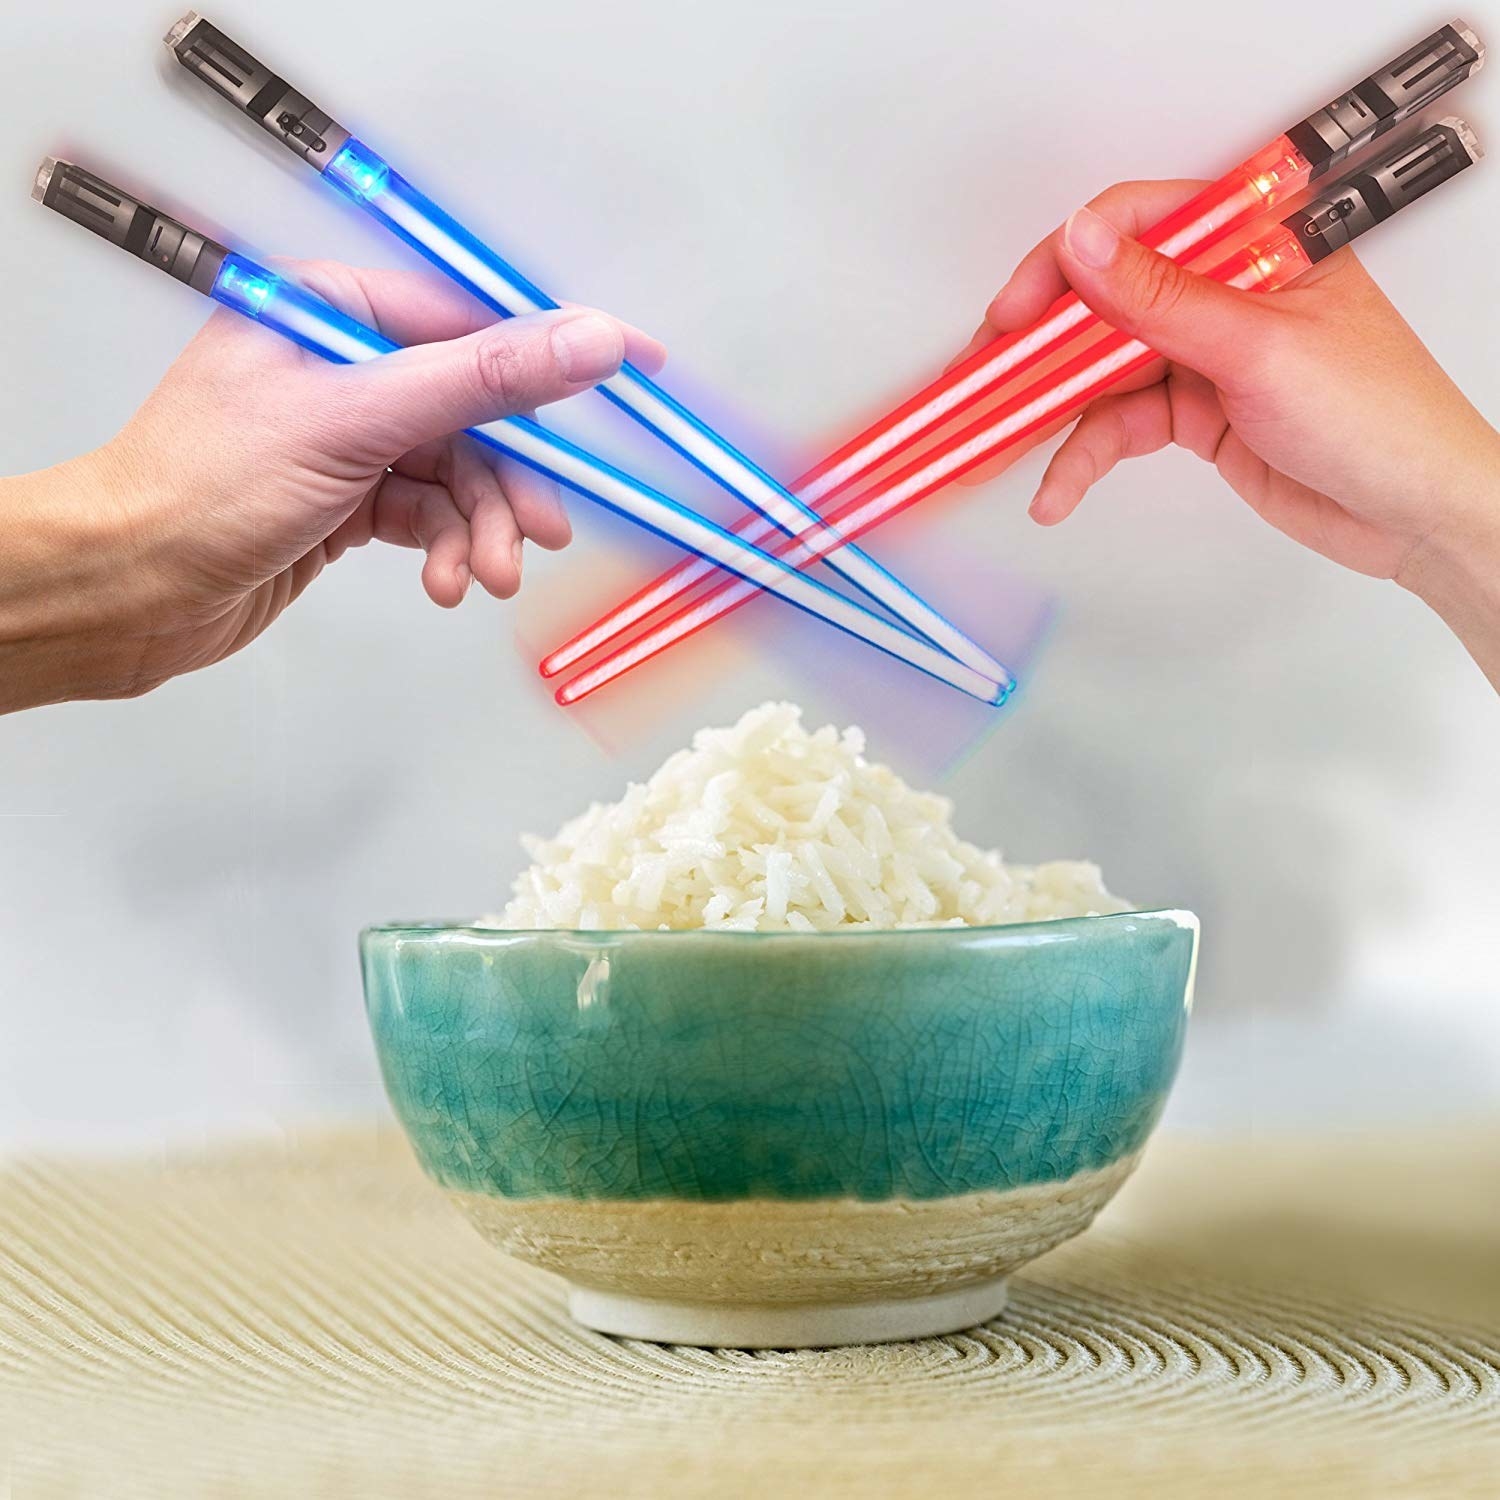 Two people battling over rice with the light-up chopsticks